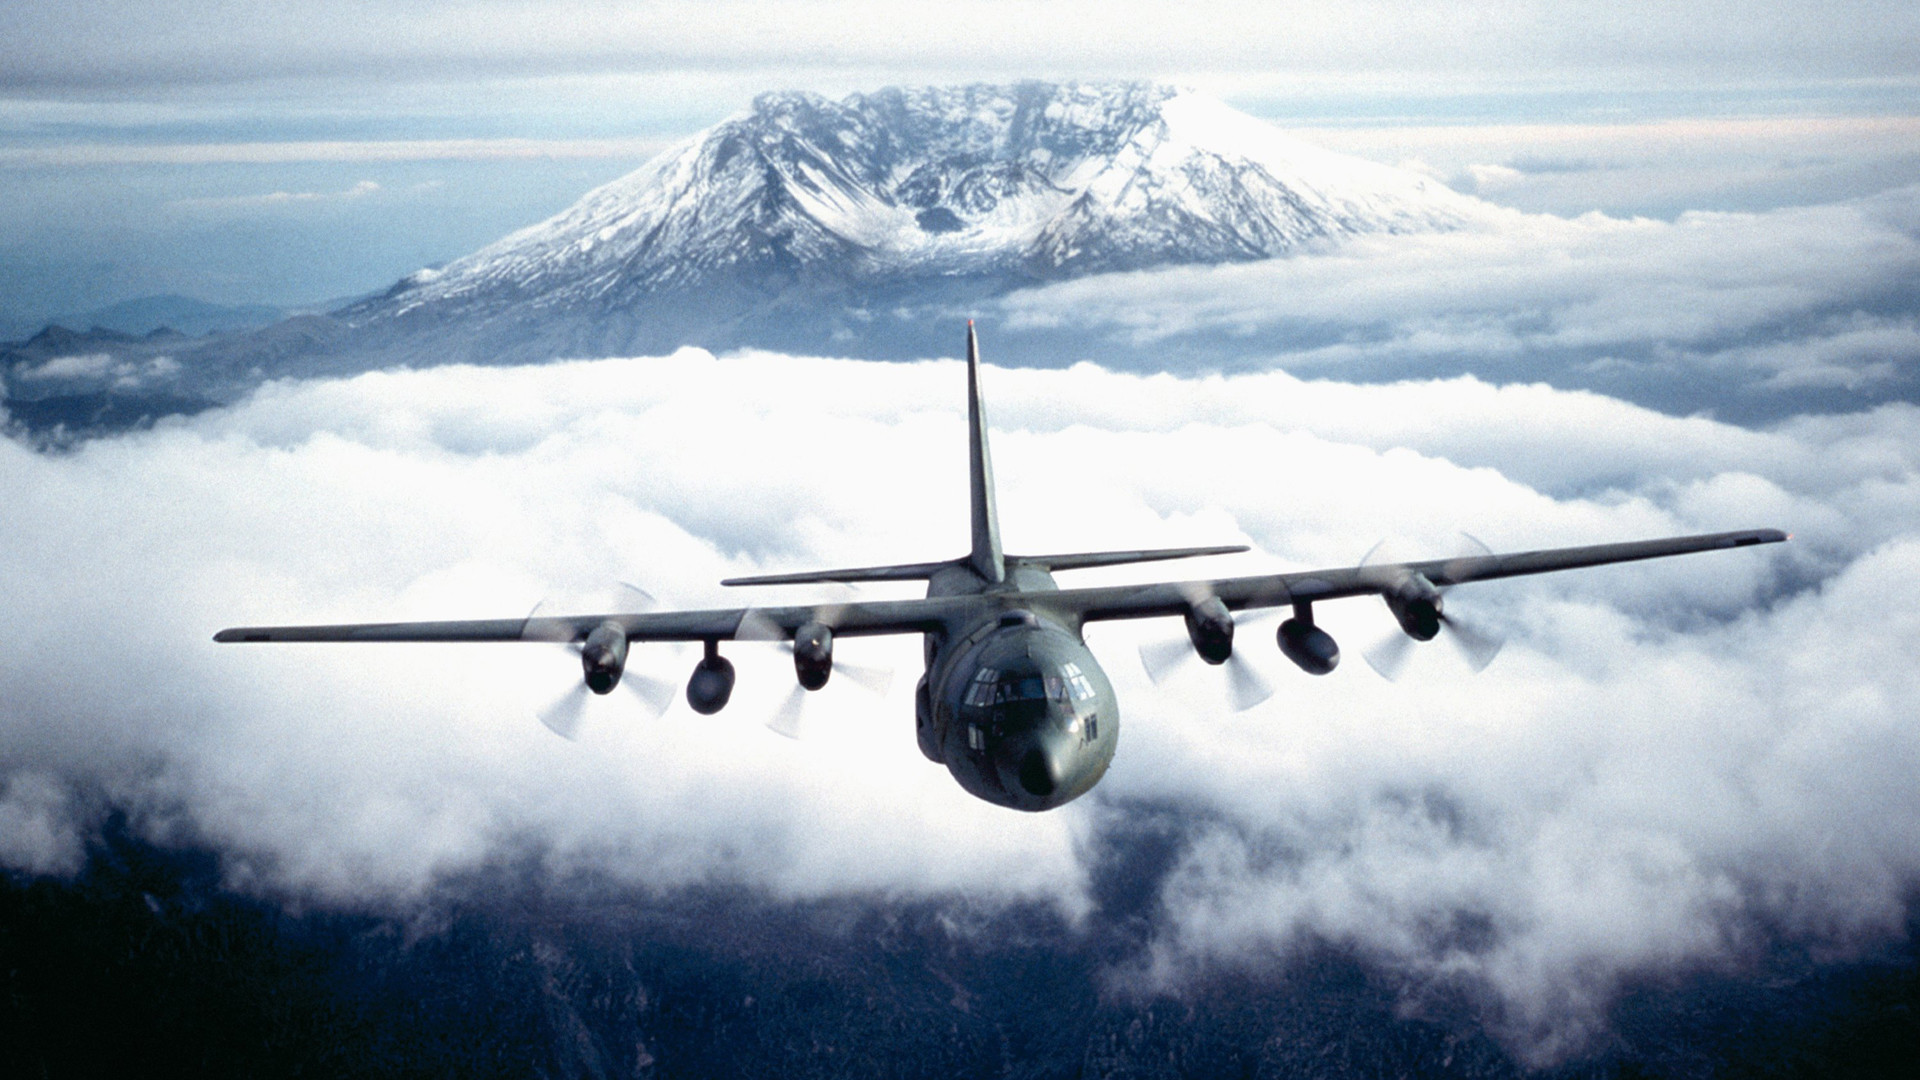 1920x1080 C-130 Hercules Army Aircraft Over Clouds Wallpaper - http://www.